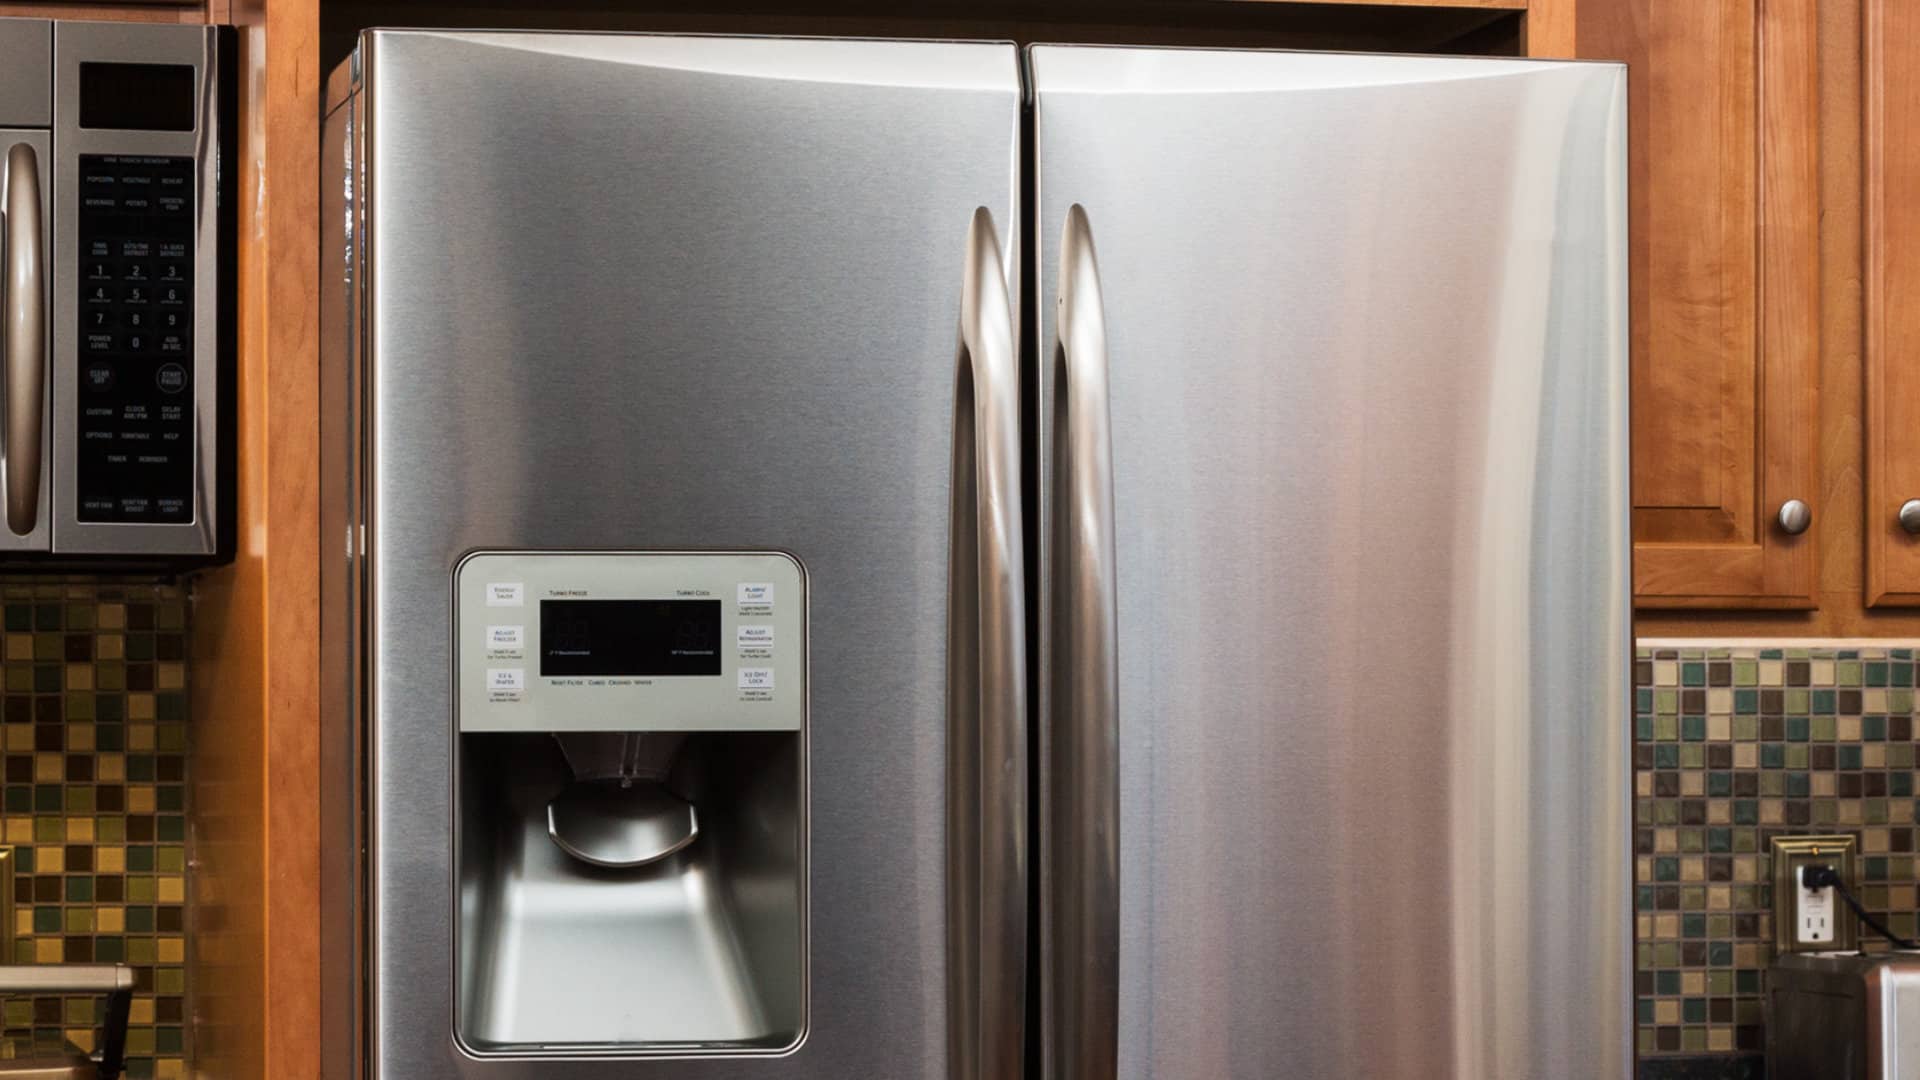 Featured image for “Warm Refrigerator, but Freezer Is Cold? Here’s What to Do”